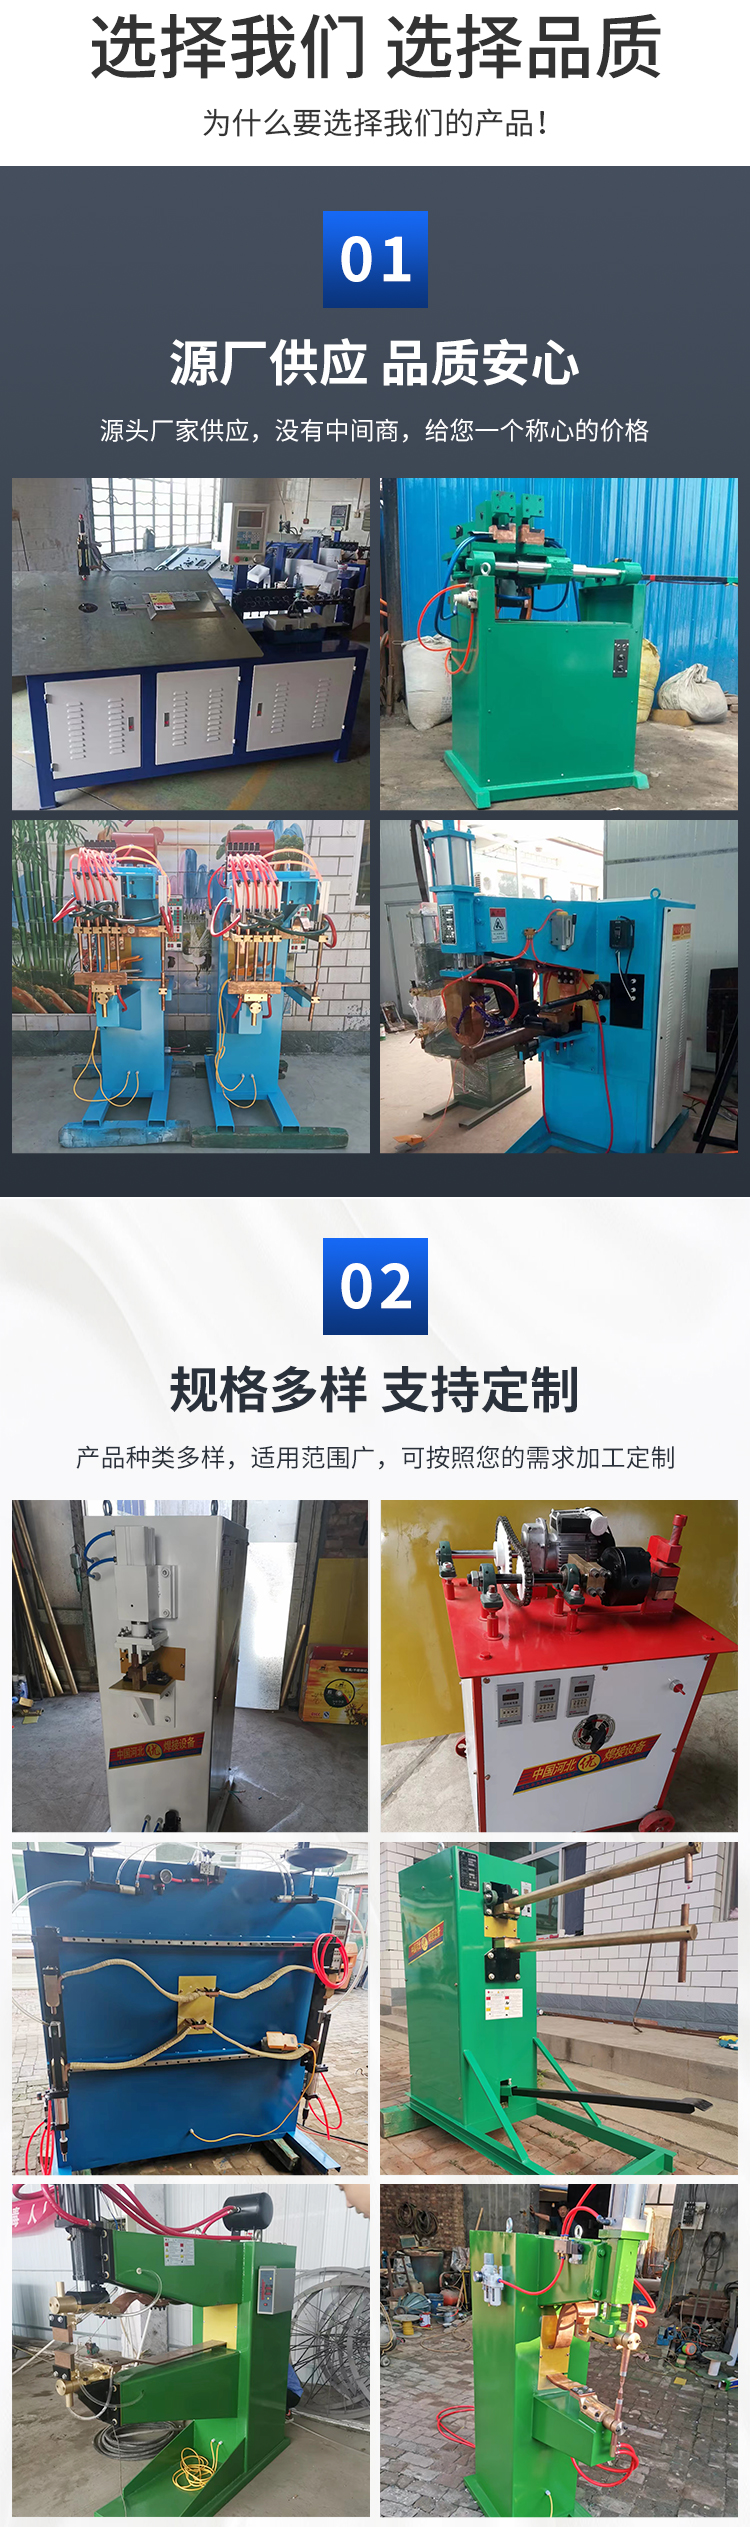 Wire rope fuse machine cone head flat head automatic sizing automatic cutting specifications can be customized